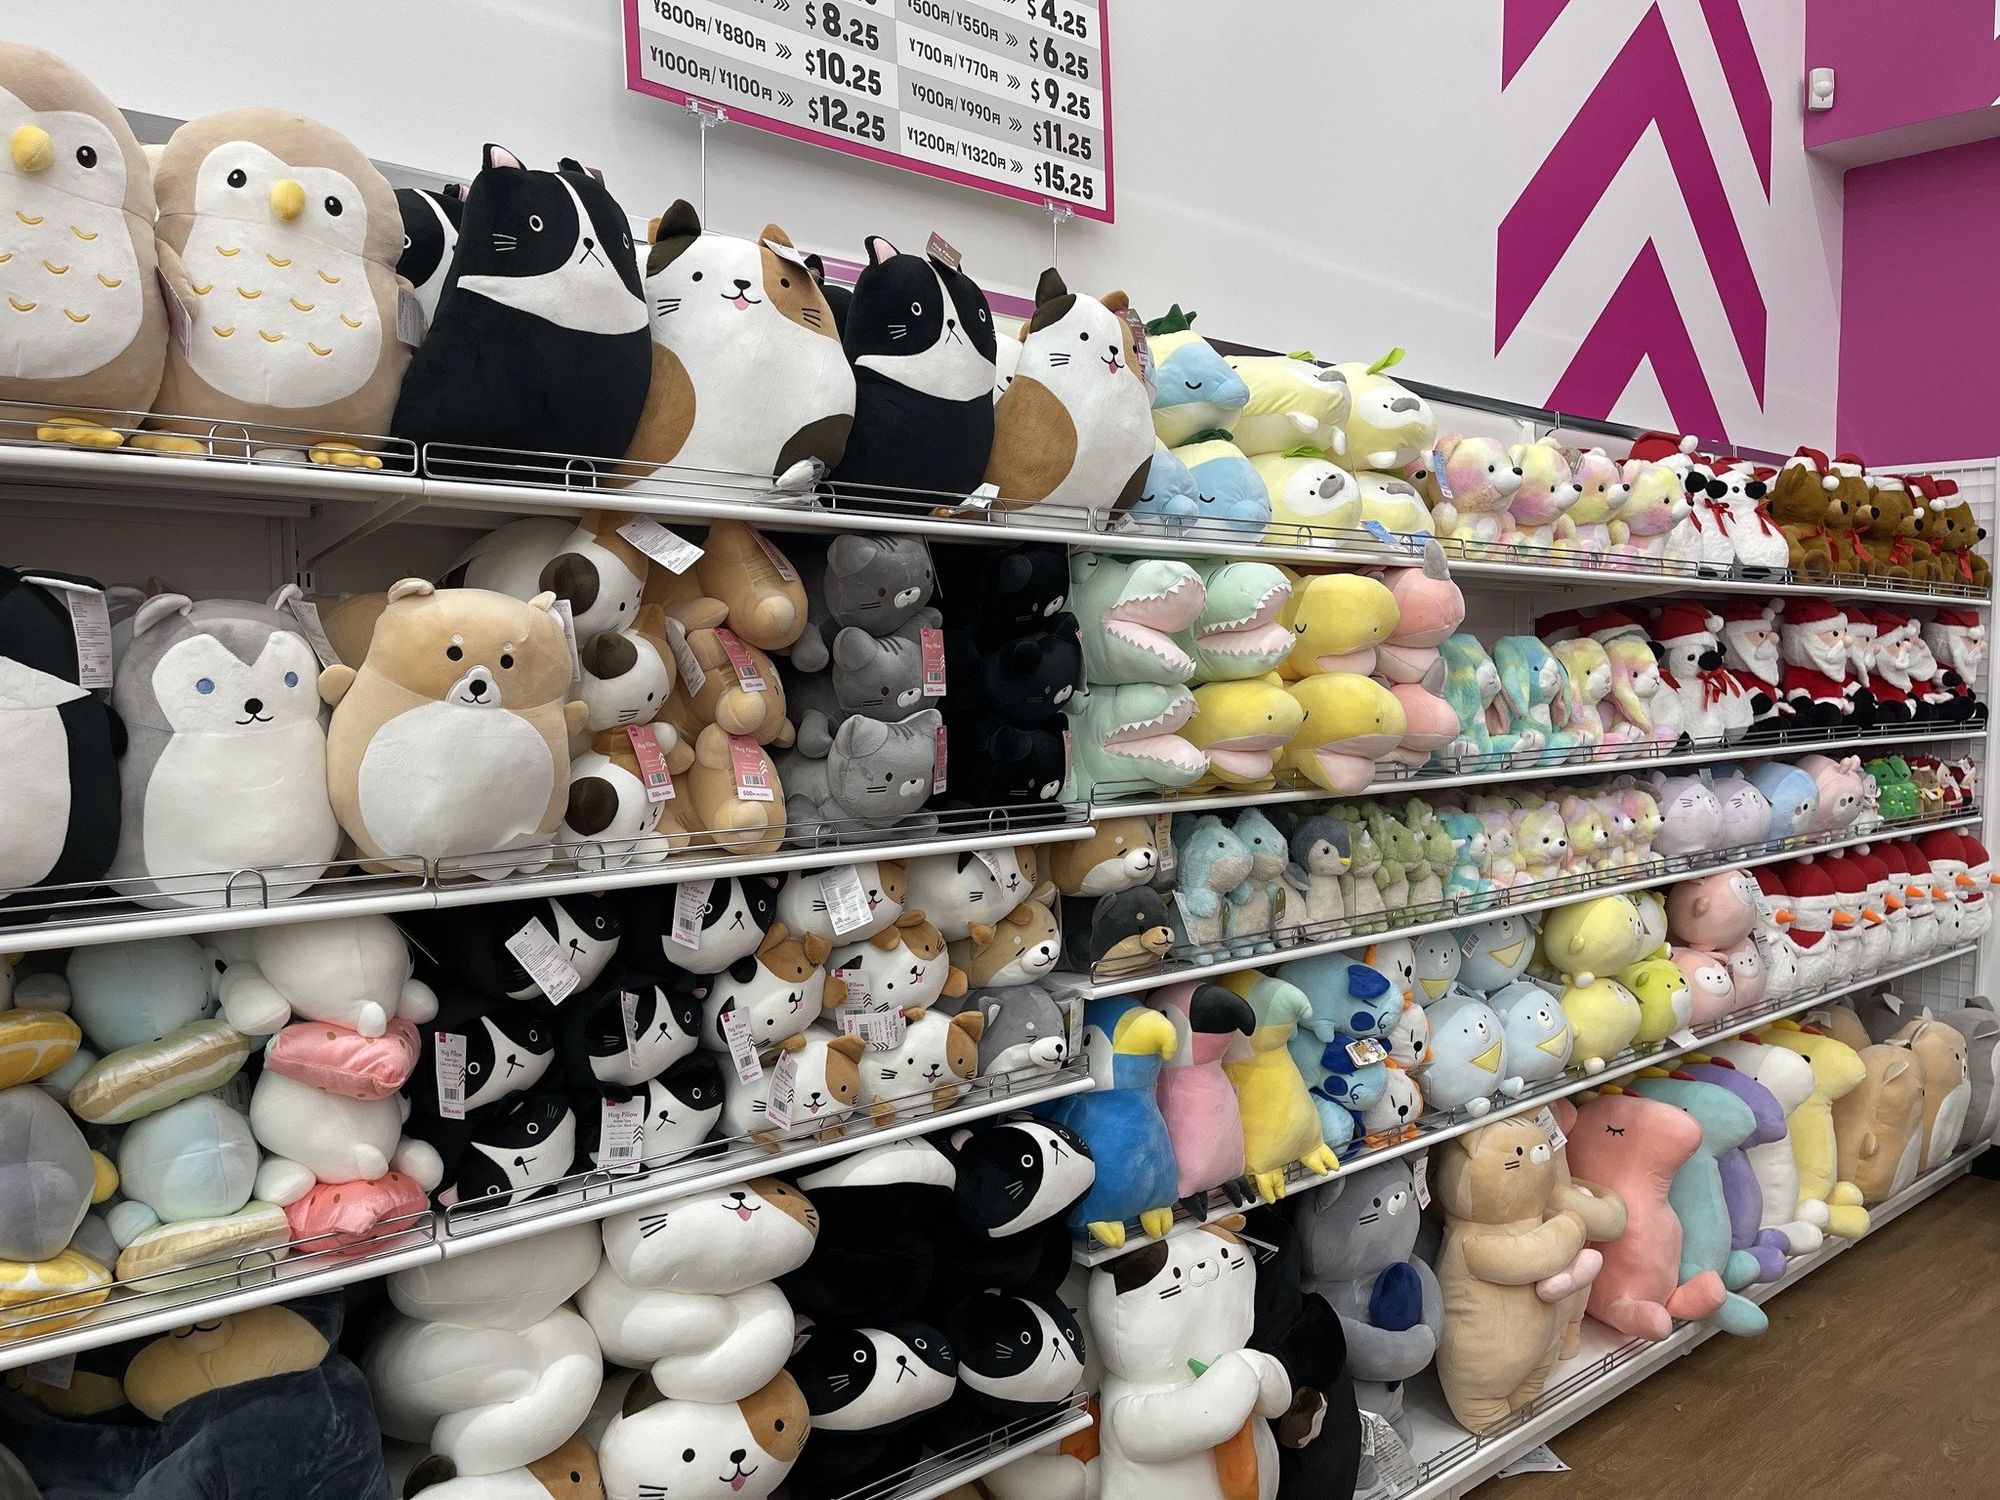 Fun Japanese store Daiso opens 2 new locations in Dallas and